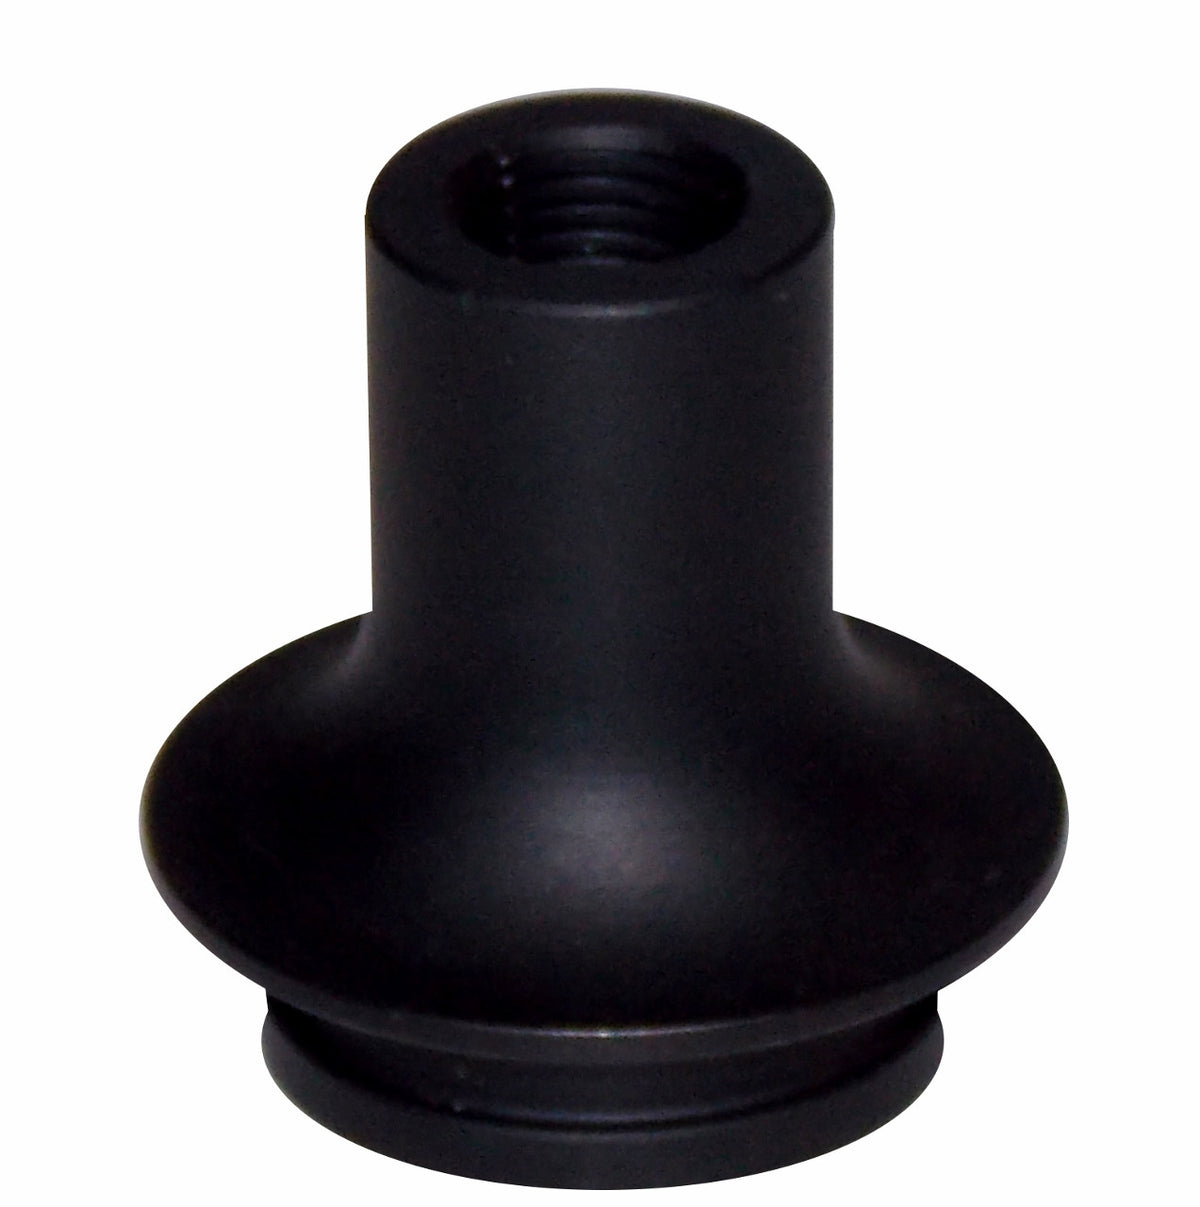 Mustang Shift Boot Retainers